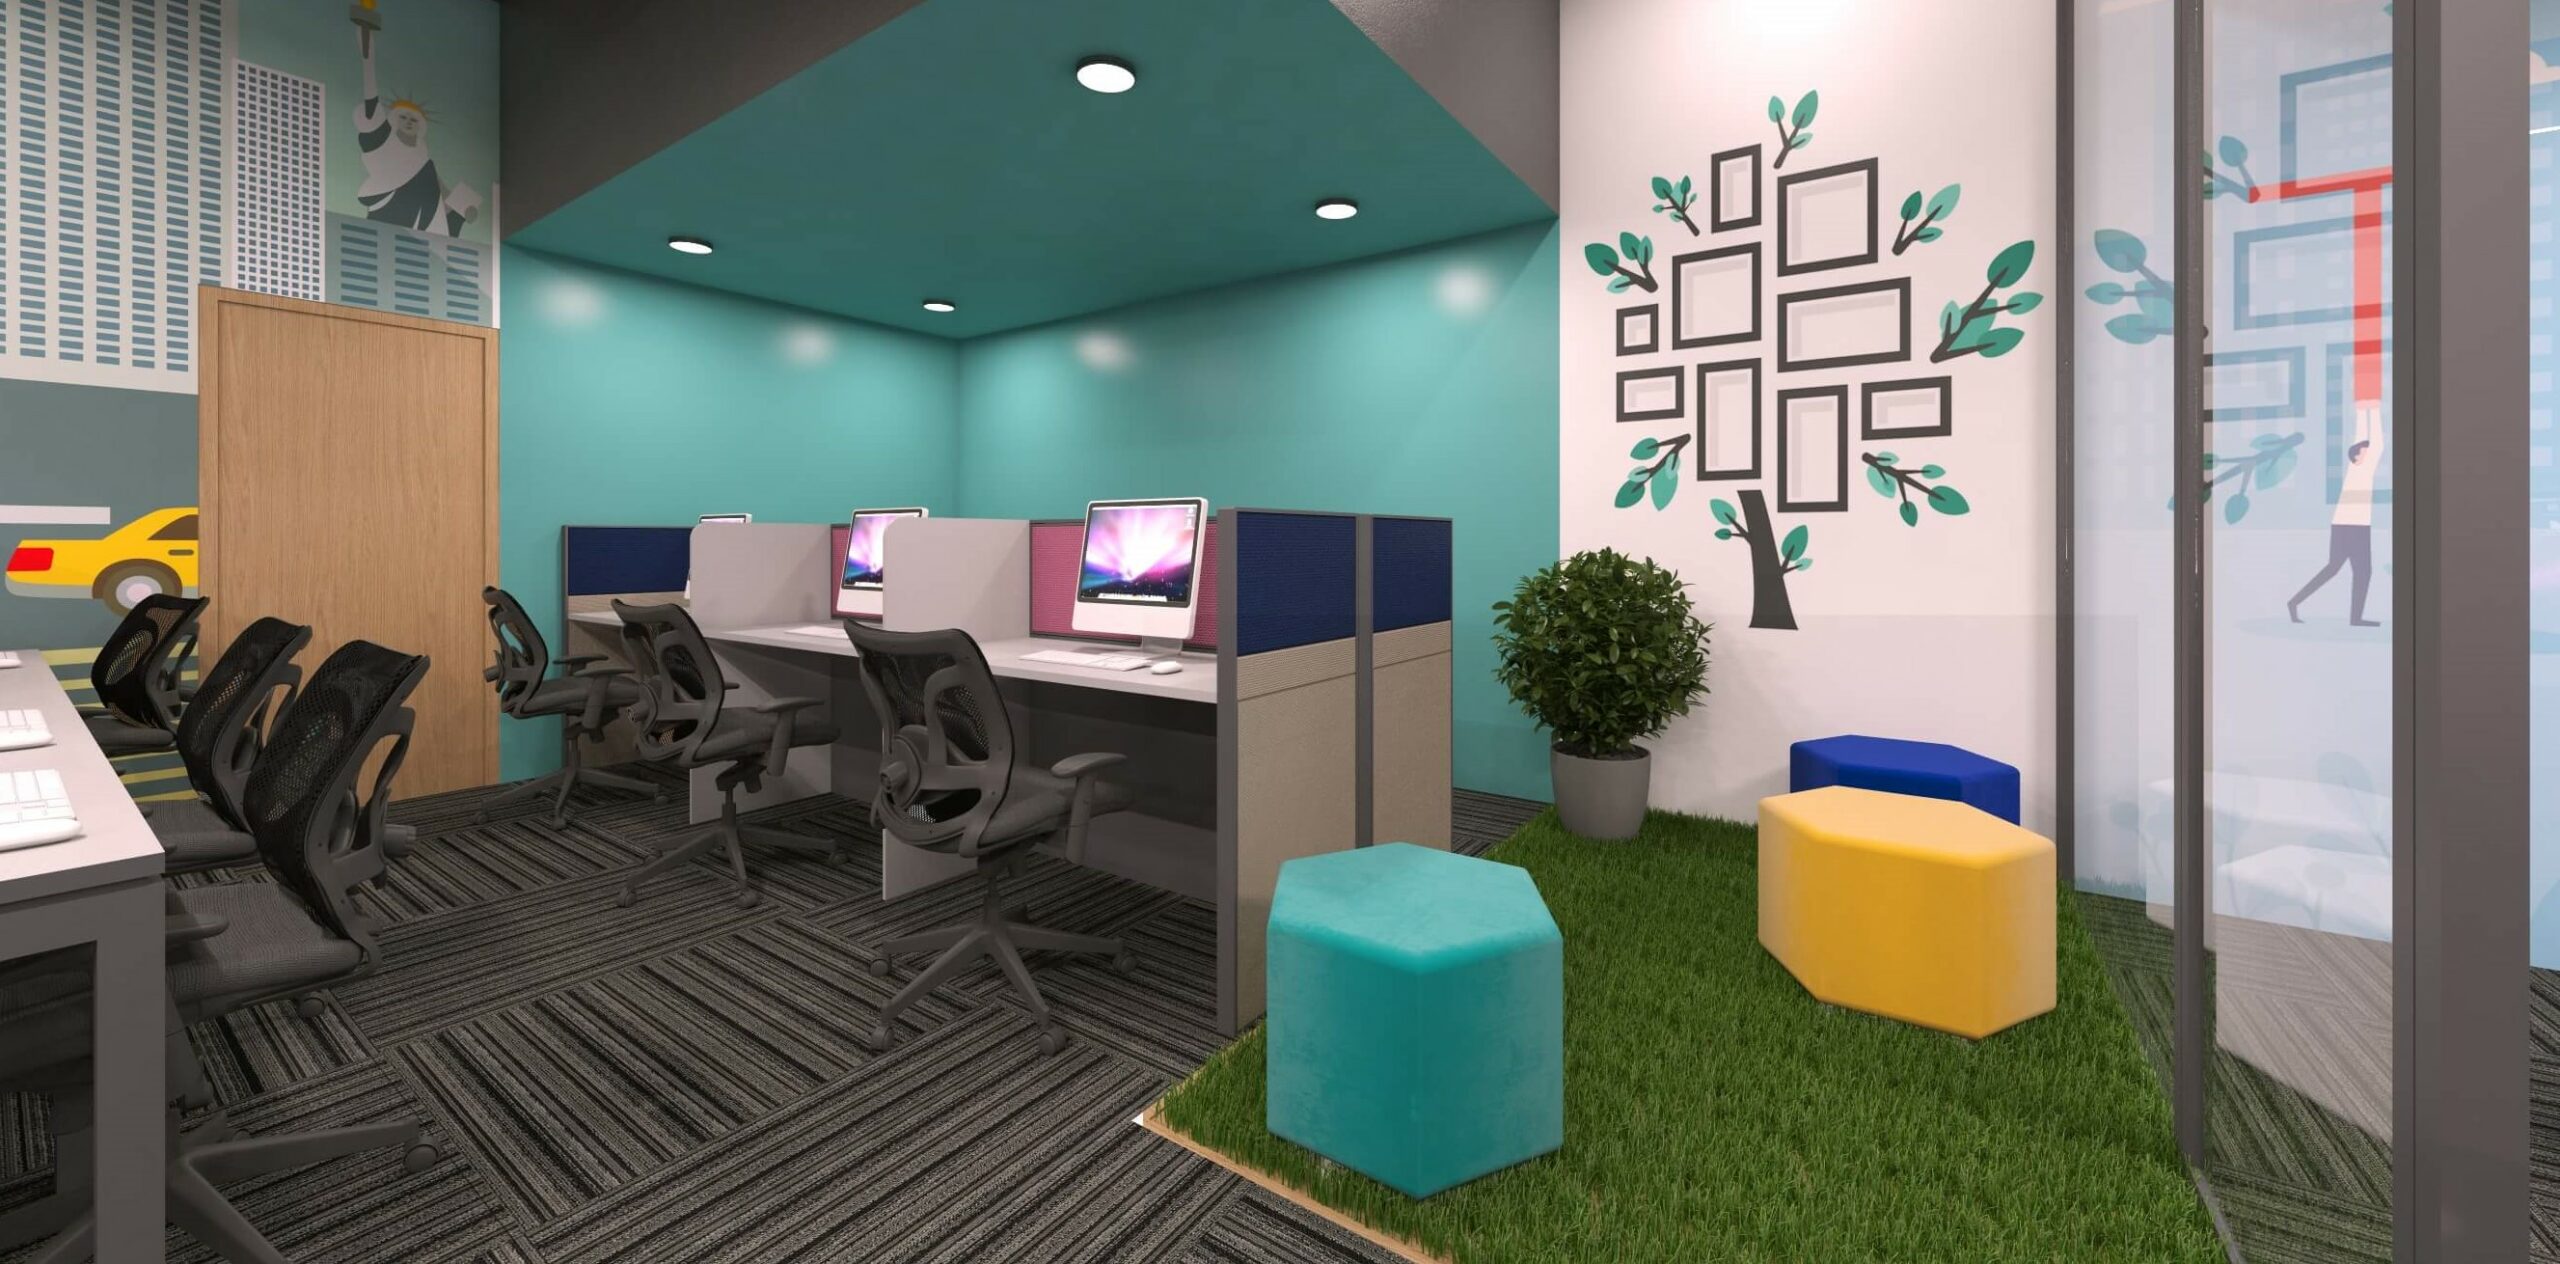 Tech Company Office Design Ideas and Inspiration